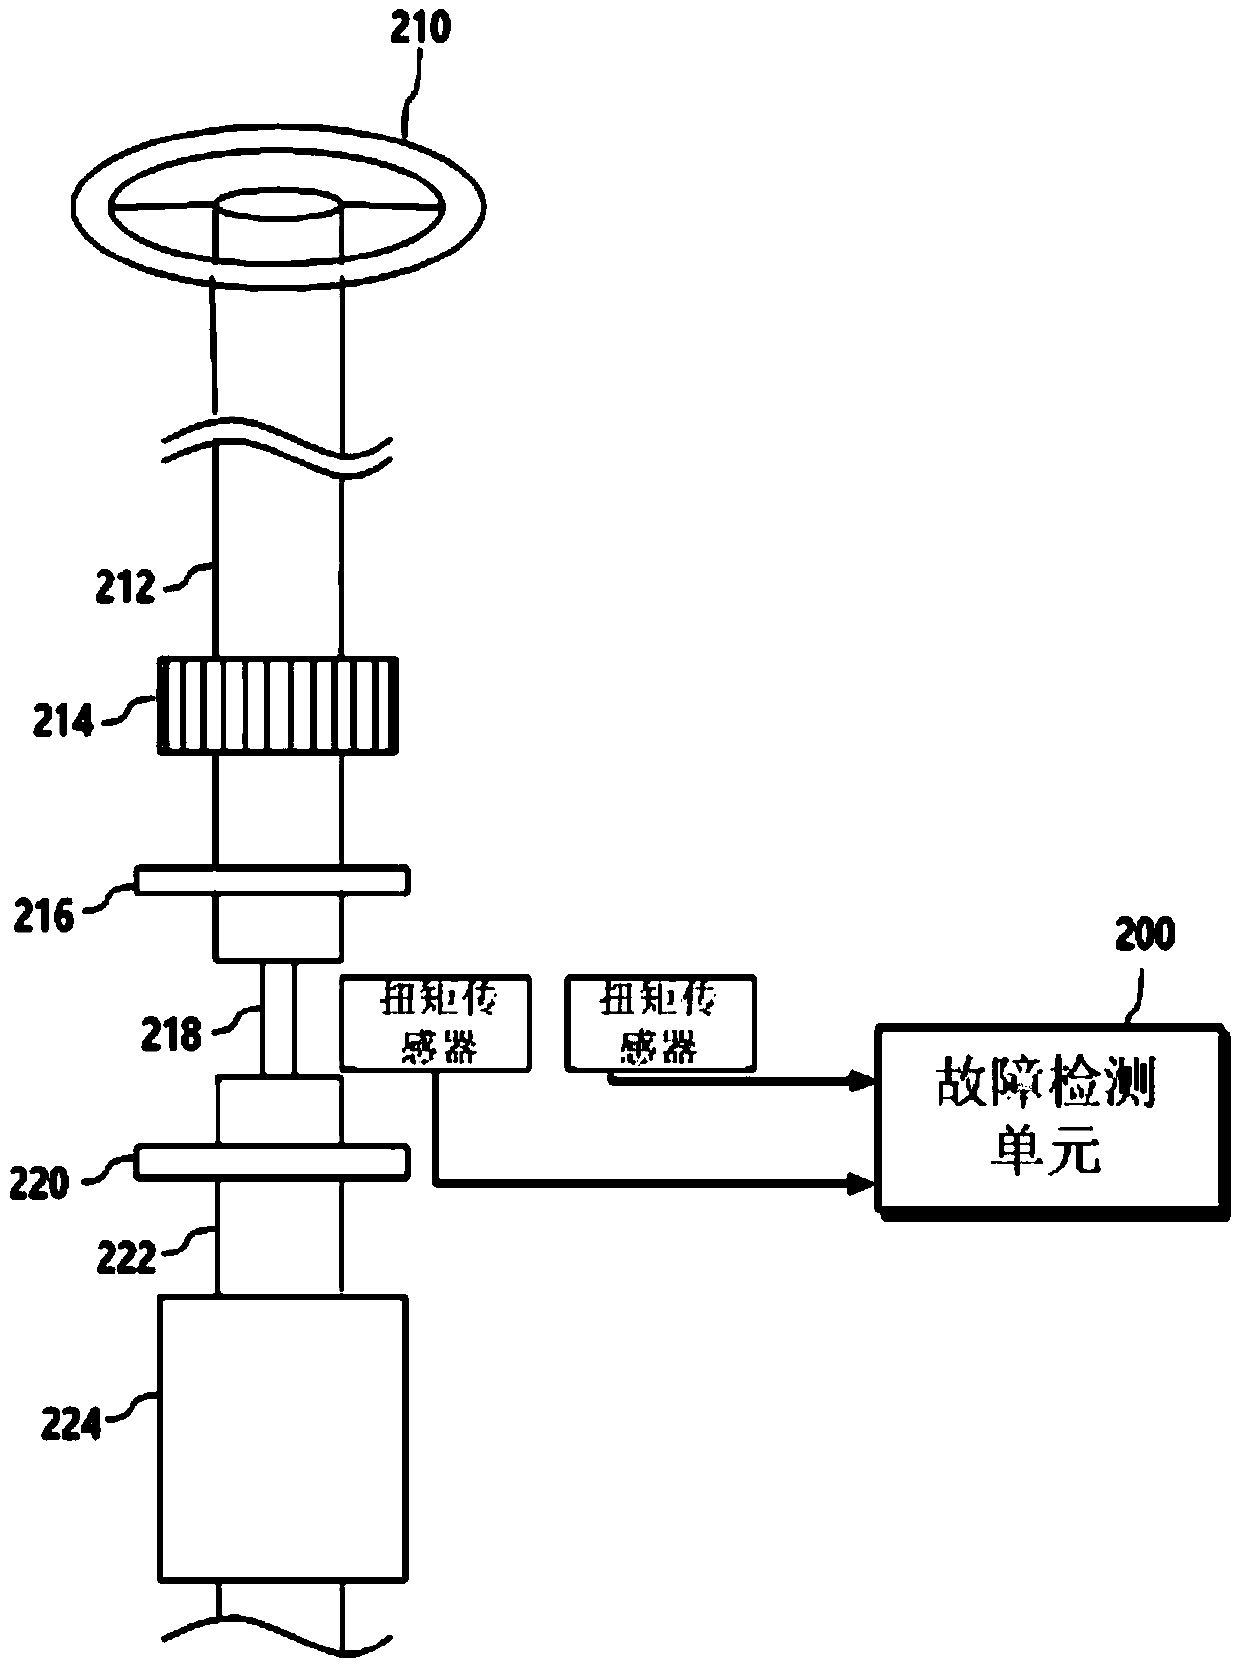 Method and apparatus for controlling electric power steering